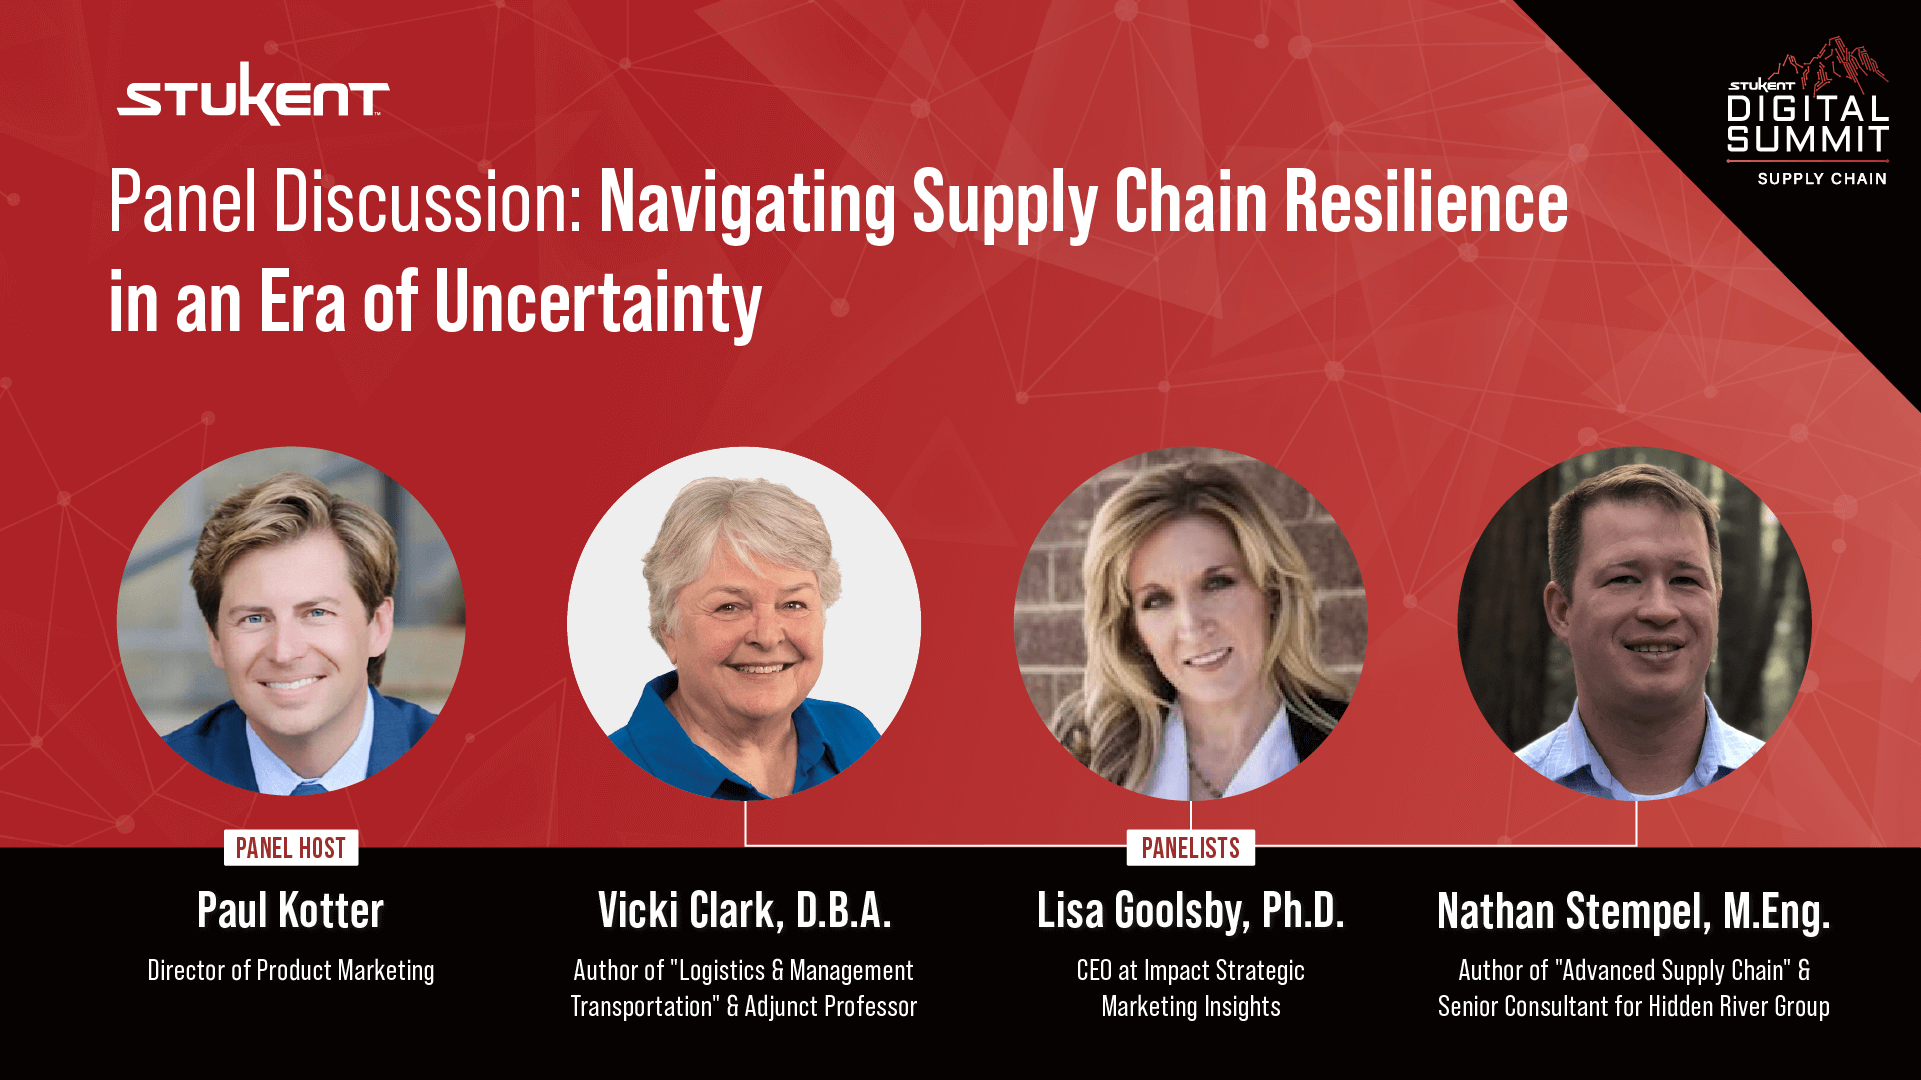 Panel Discussion: Navigating Supply Chain Resilience in an Era of Uncertainty